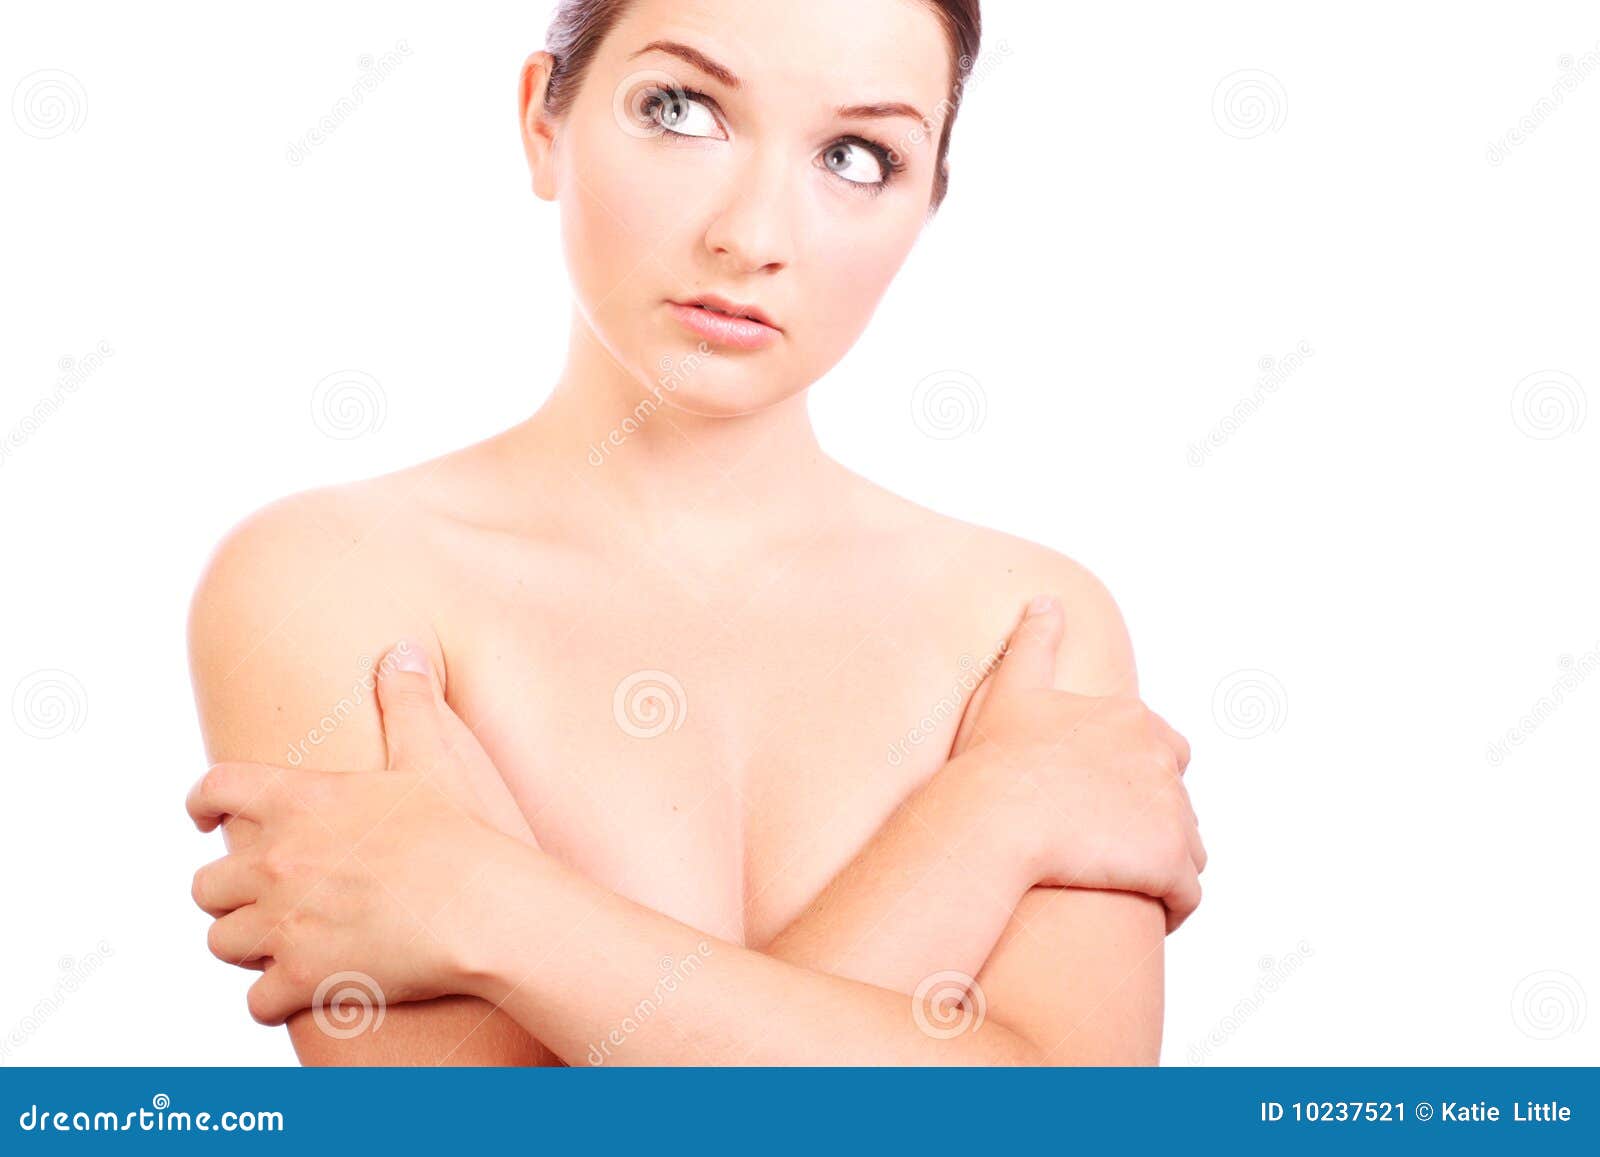 File:A young woman, taken by surprise, covers her breasts. Wellcome  L0074555.jpg - Wikimedia Commons